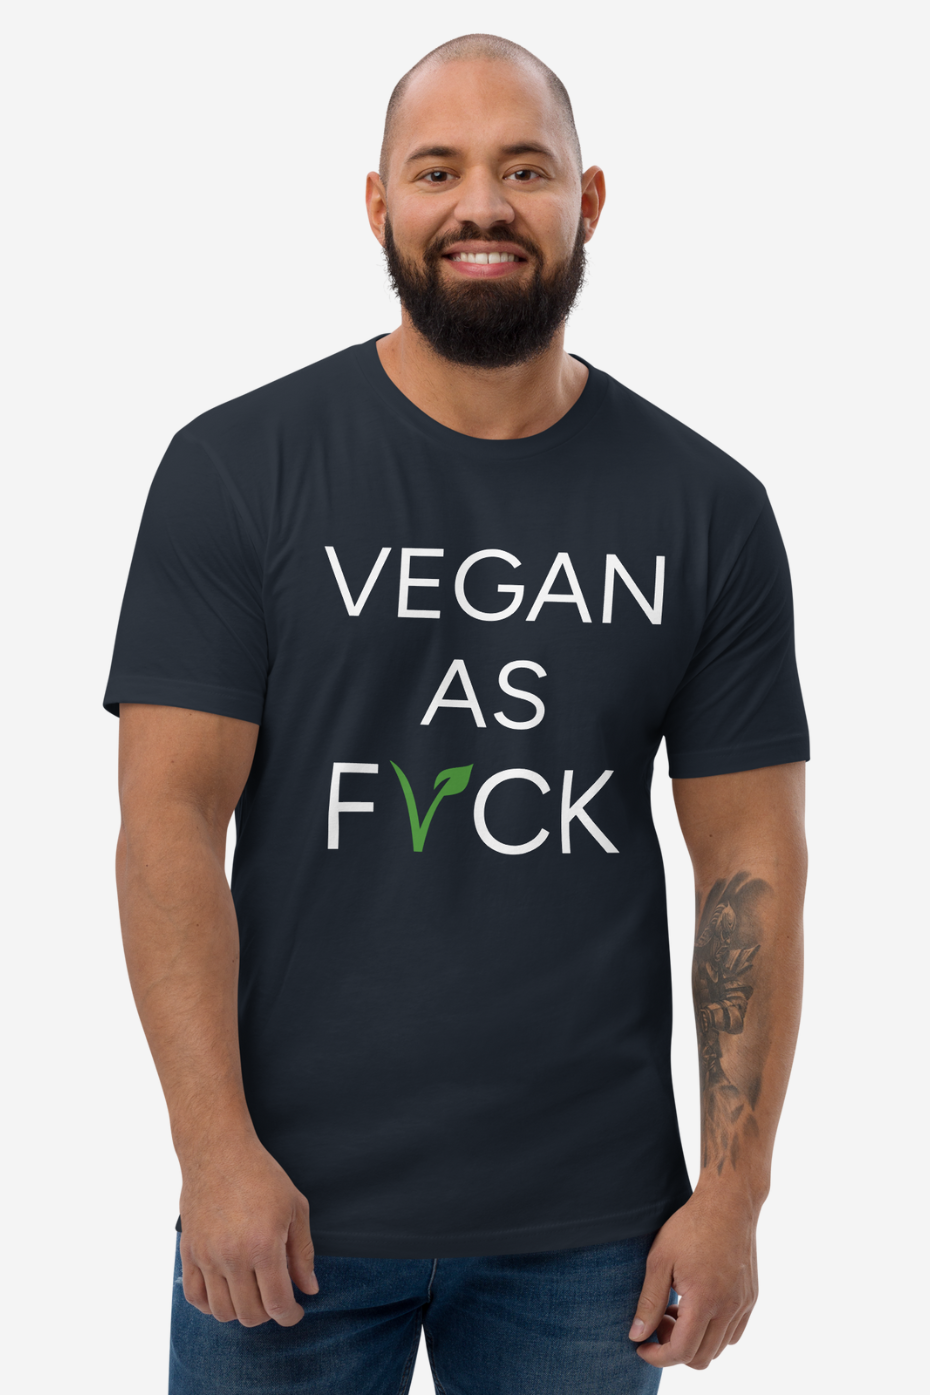 Vegan as Fvck Men's Fitted T-Shirt